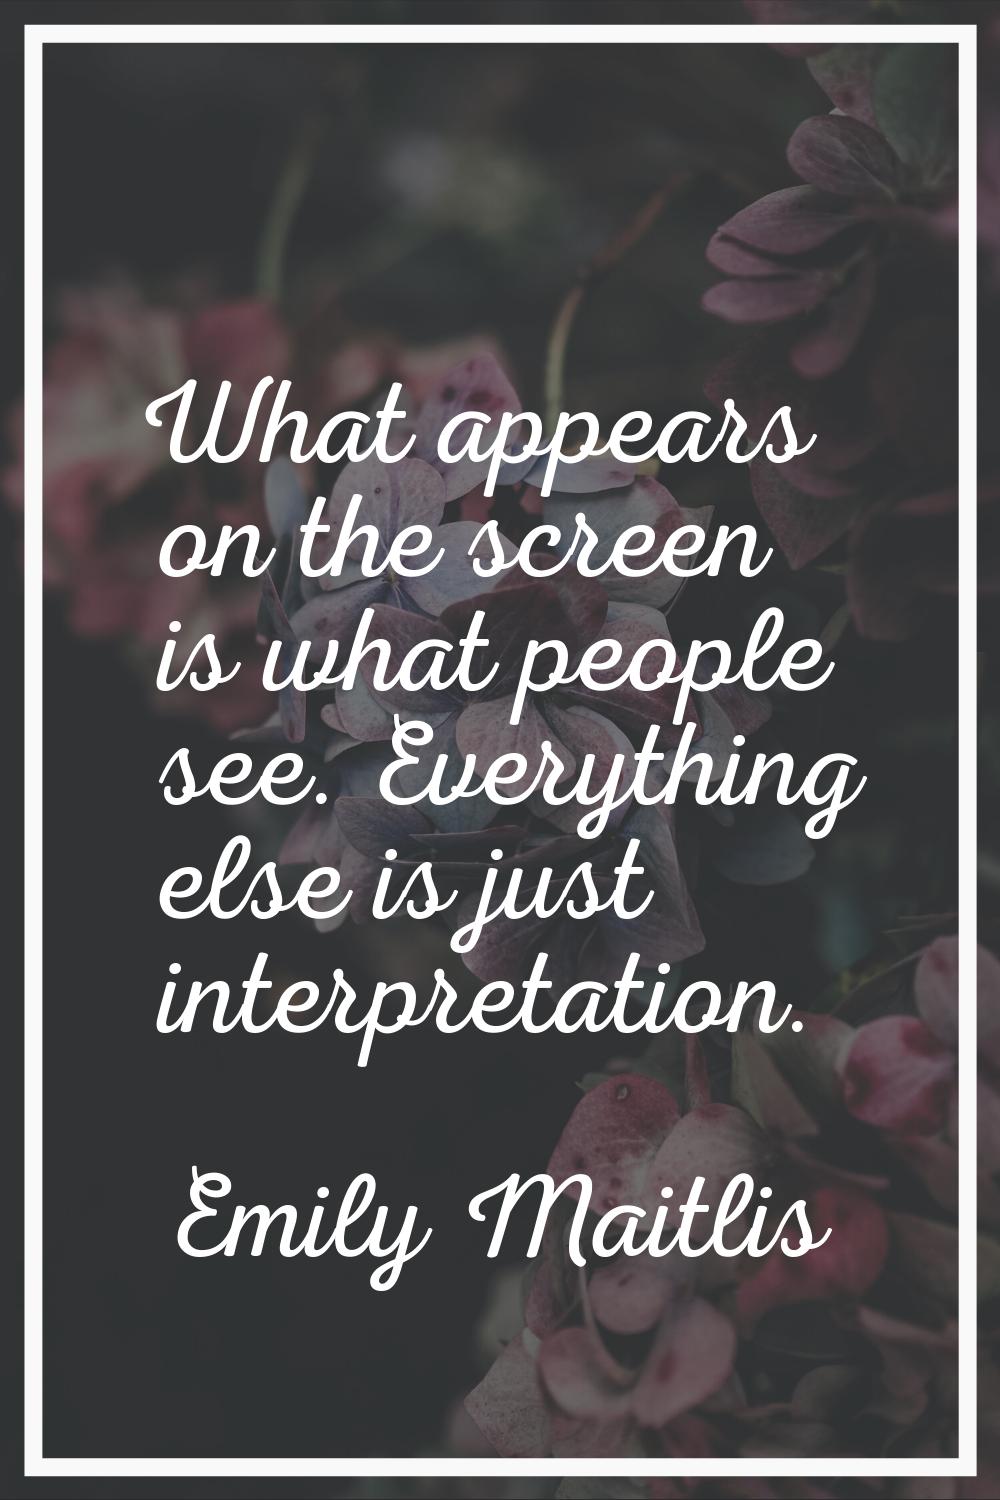 What appears on the screen is what people see. Everything else is just interpretation.